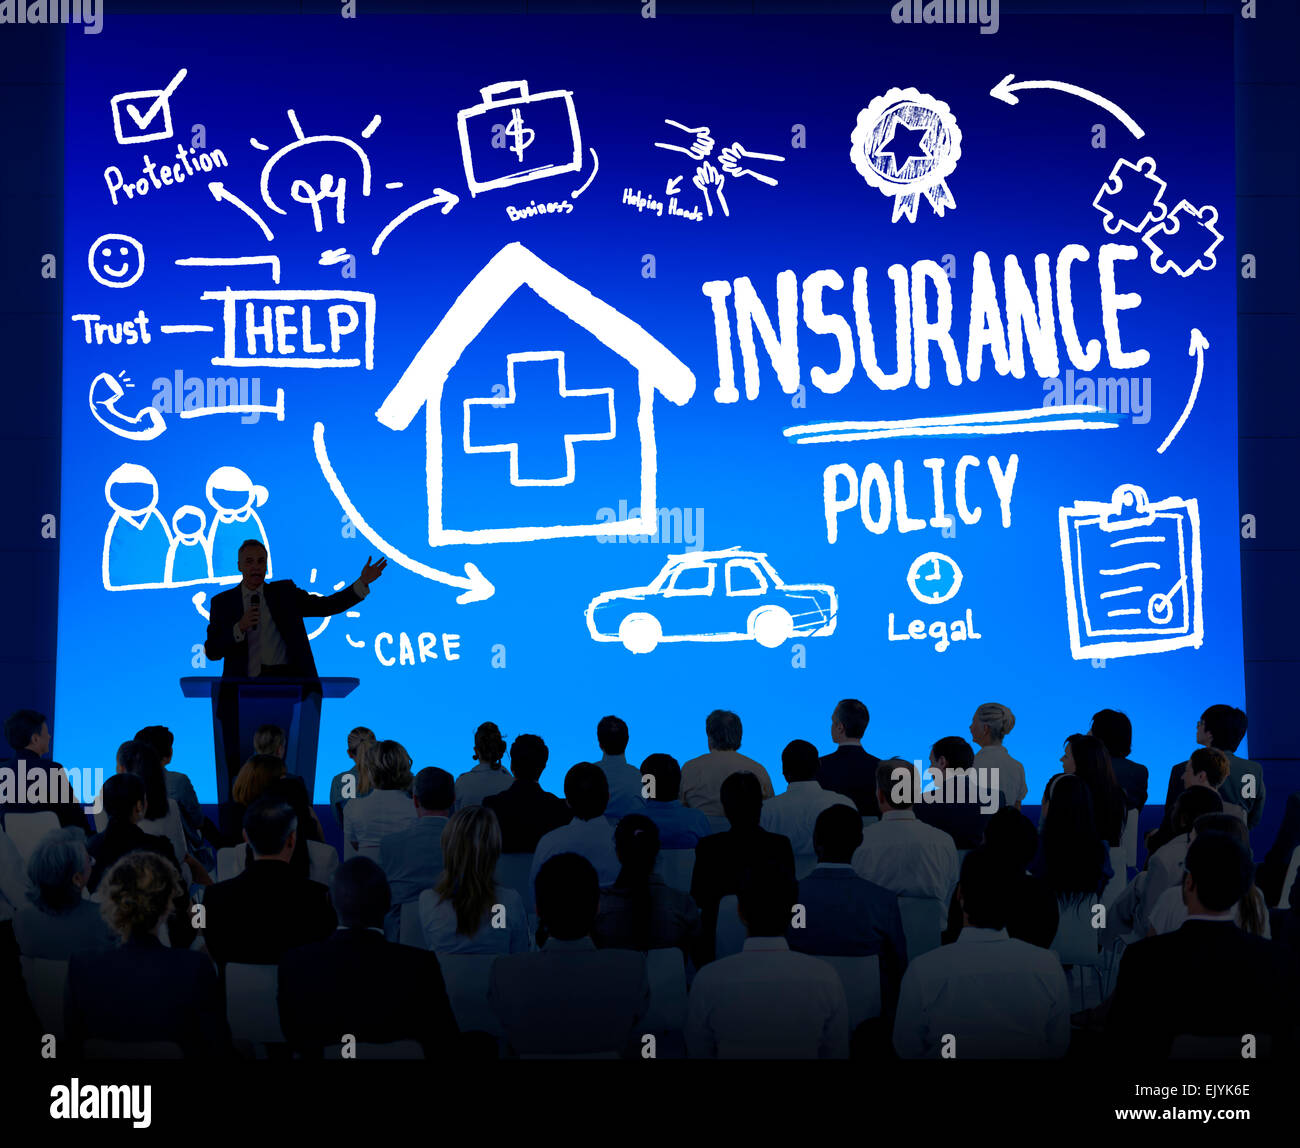 Diversity Business People Insurance Policy Seminar Conference Concept Stock Photo